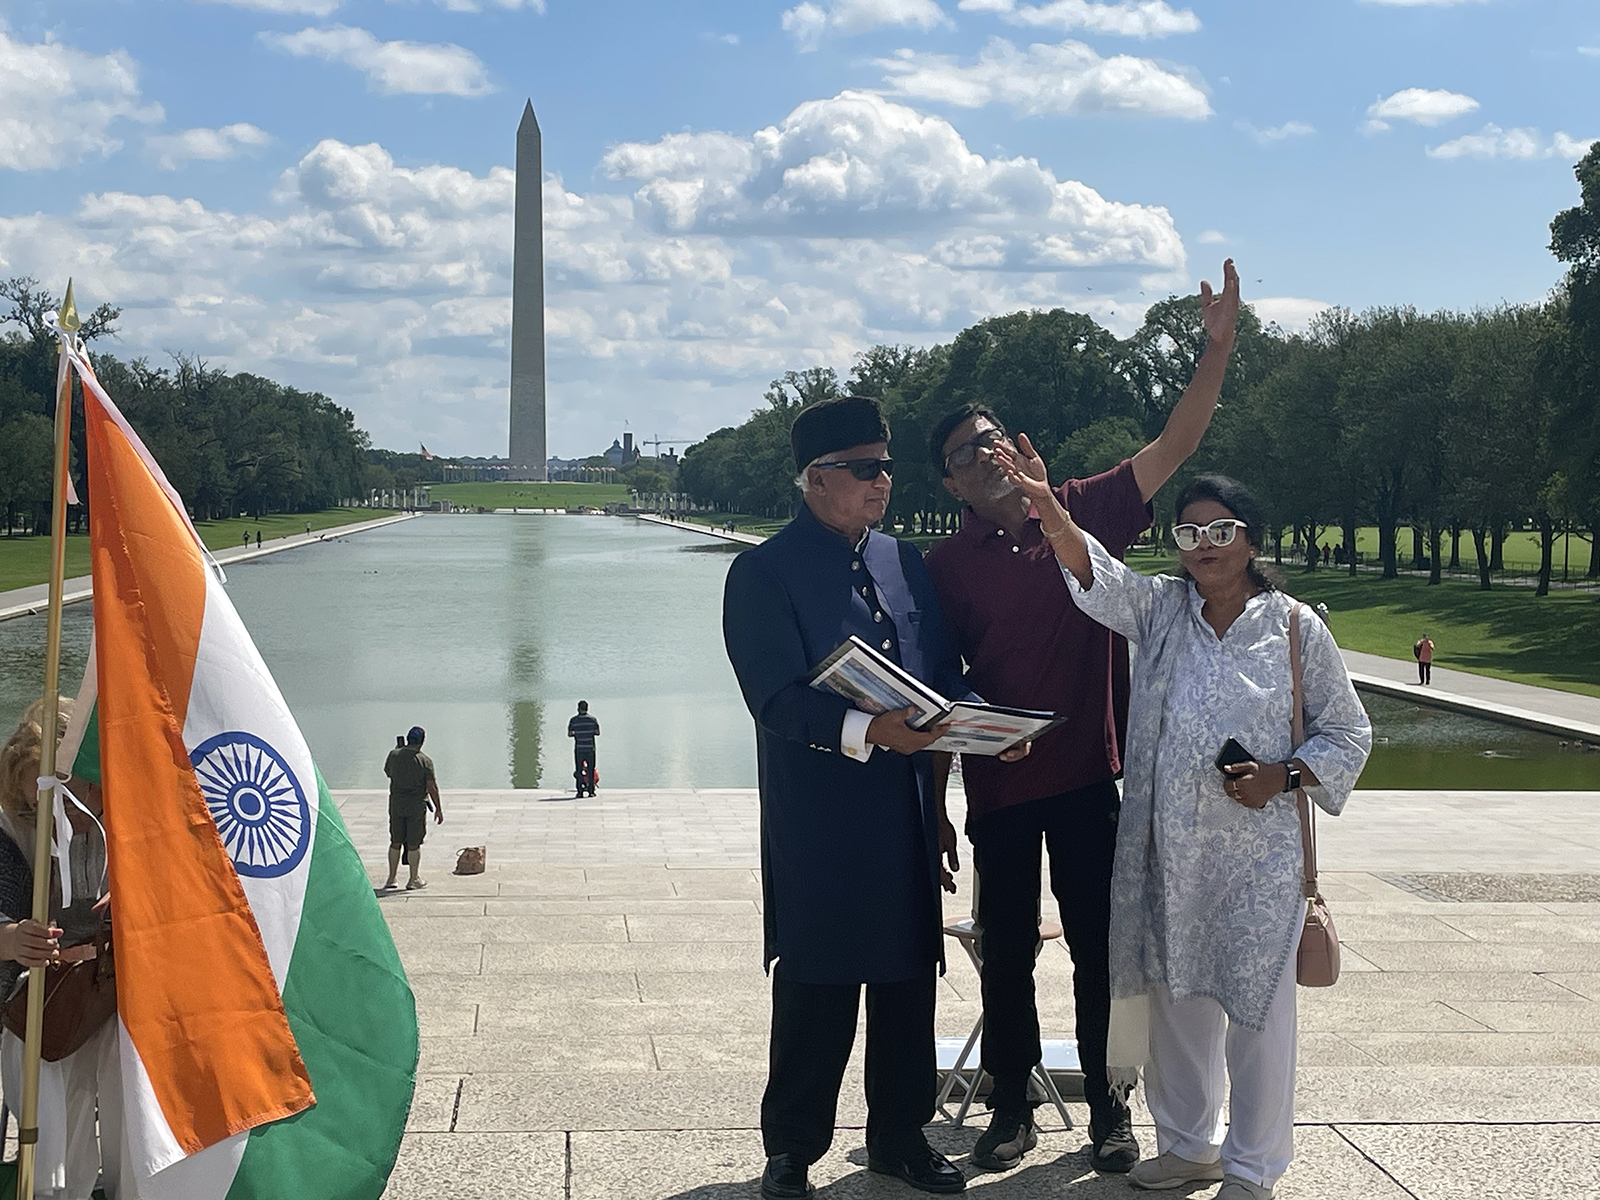 MIke Ghouse, on left holding binder, leads an India Independence Day event on the National Mall in Washington, Sunday, Aug. 13, 2023. RNS photo by Richa Karmarkar